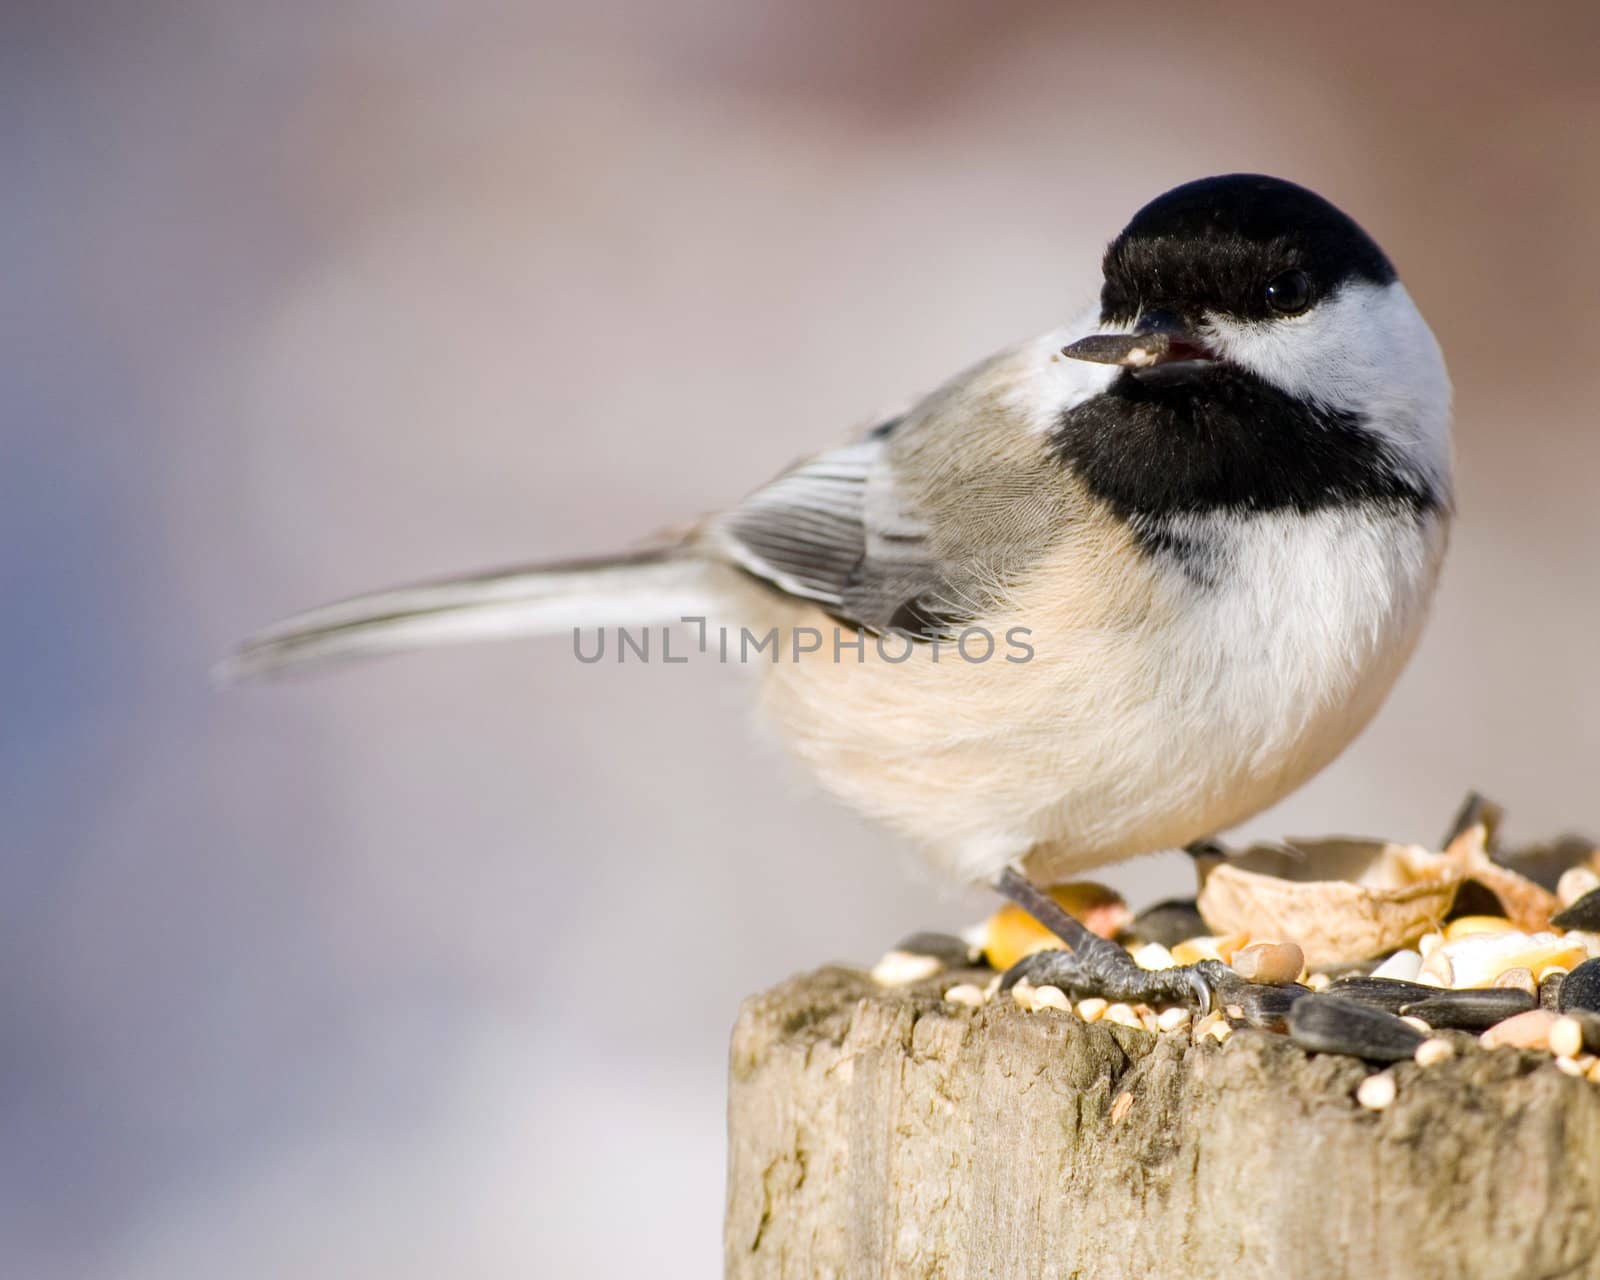 A black-capped chickadee perched on a post with bird seed.